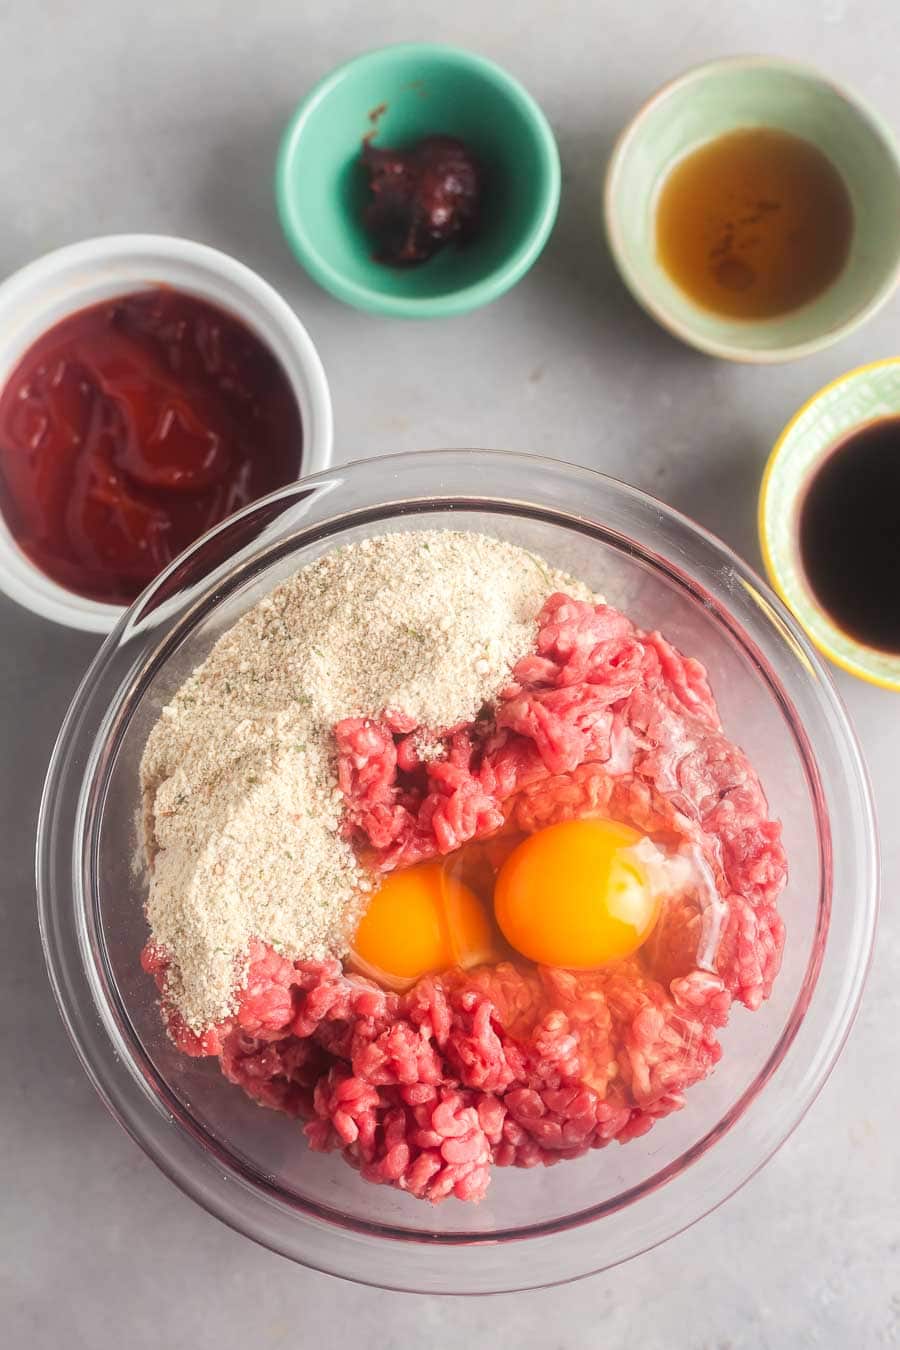 An overhead view of the ingredients to make slow cooker meatloaf. Ground beef, eggs, and breadcrumbs are together in a large bowl, The sauce ingredients are in individual bowls alongside